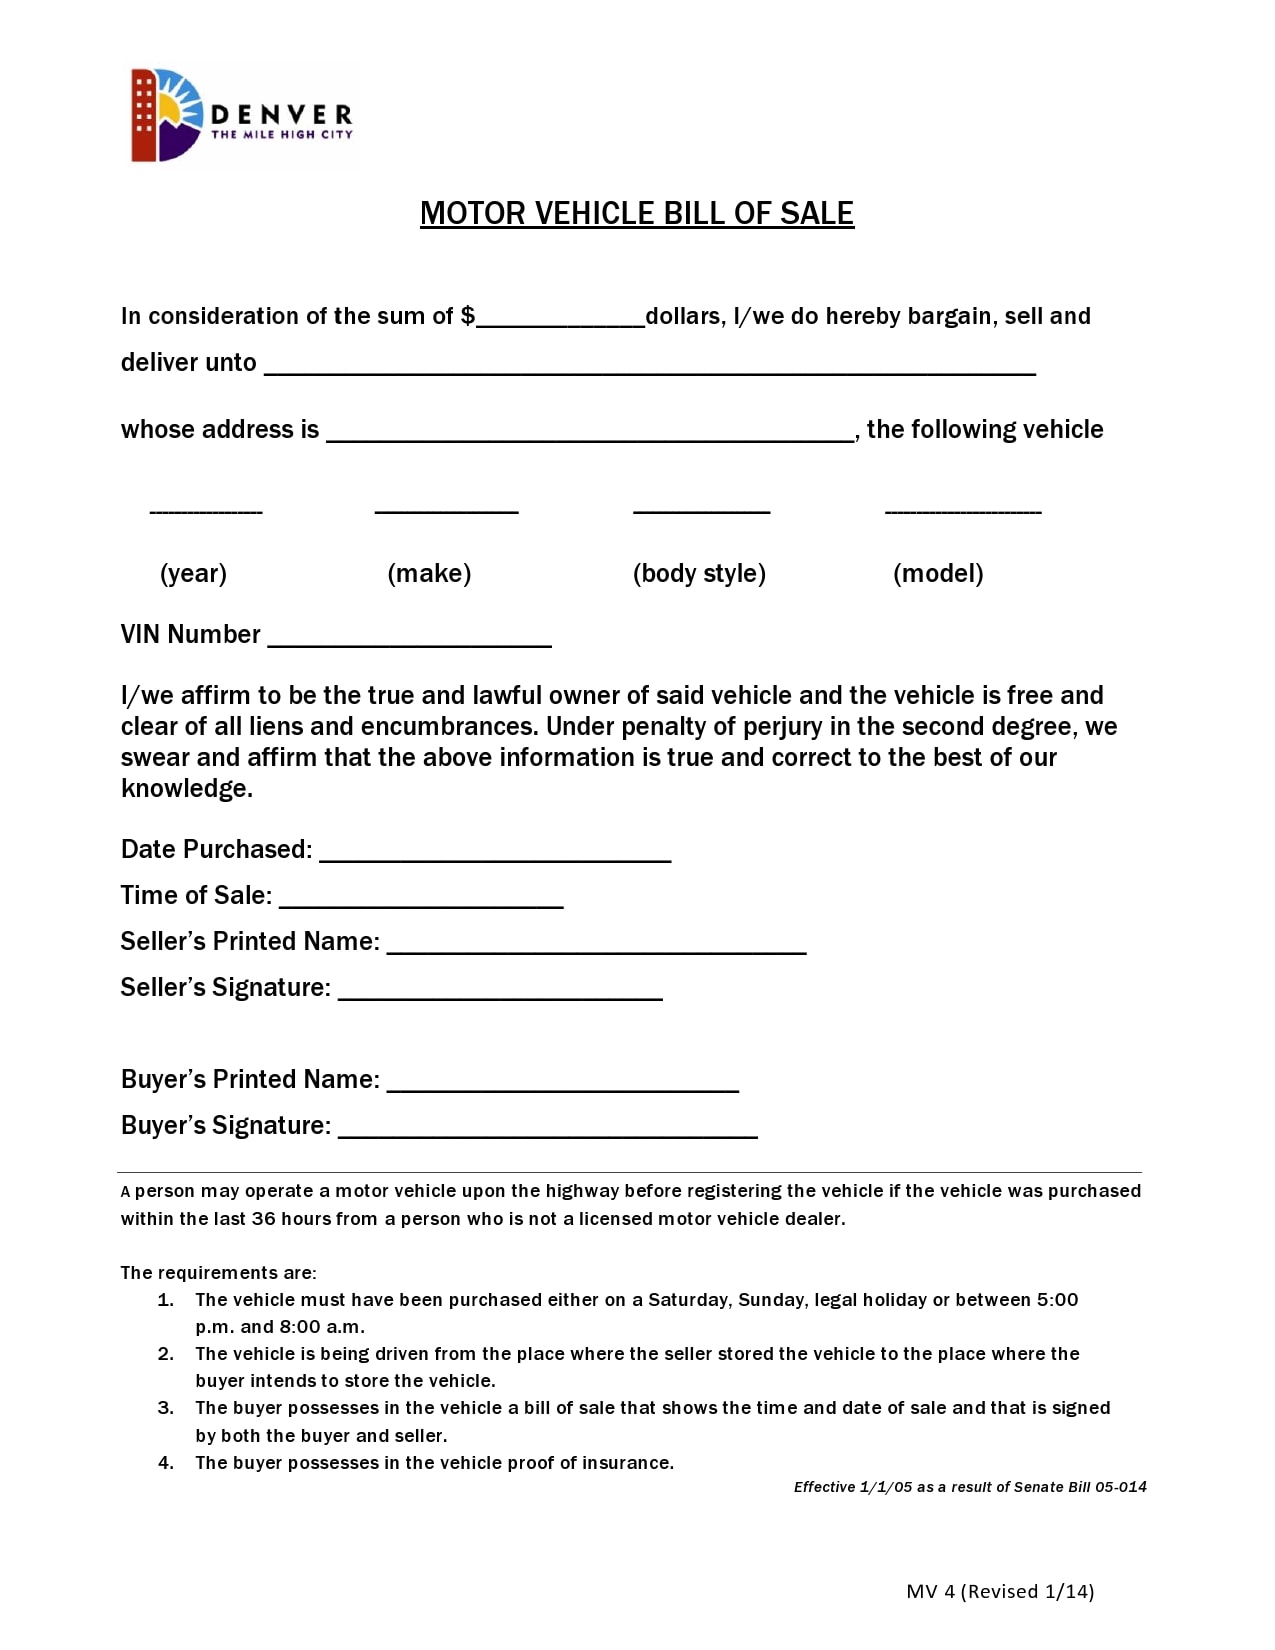 17 Printable Motorcycle Bill Of Sale Forms [Free] - TemplateArchive